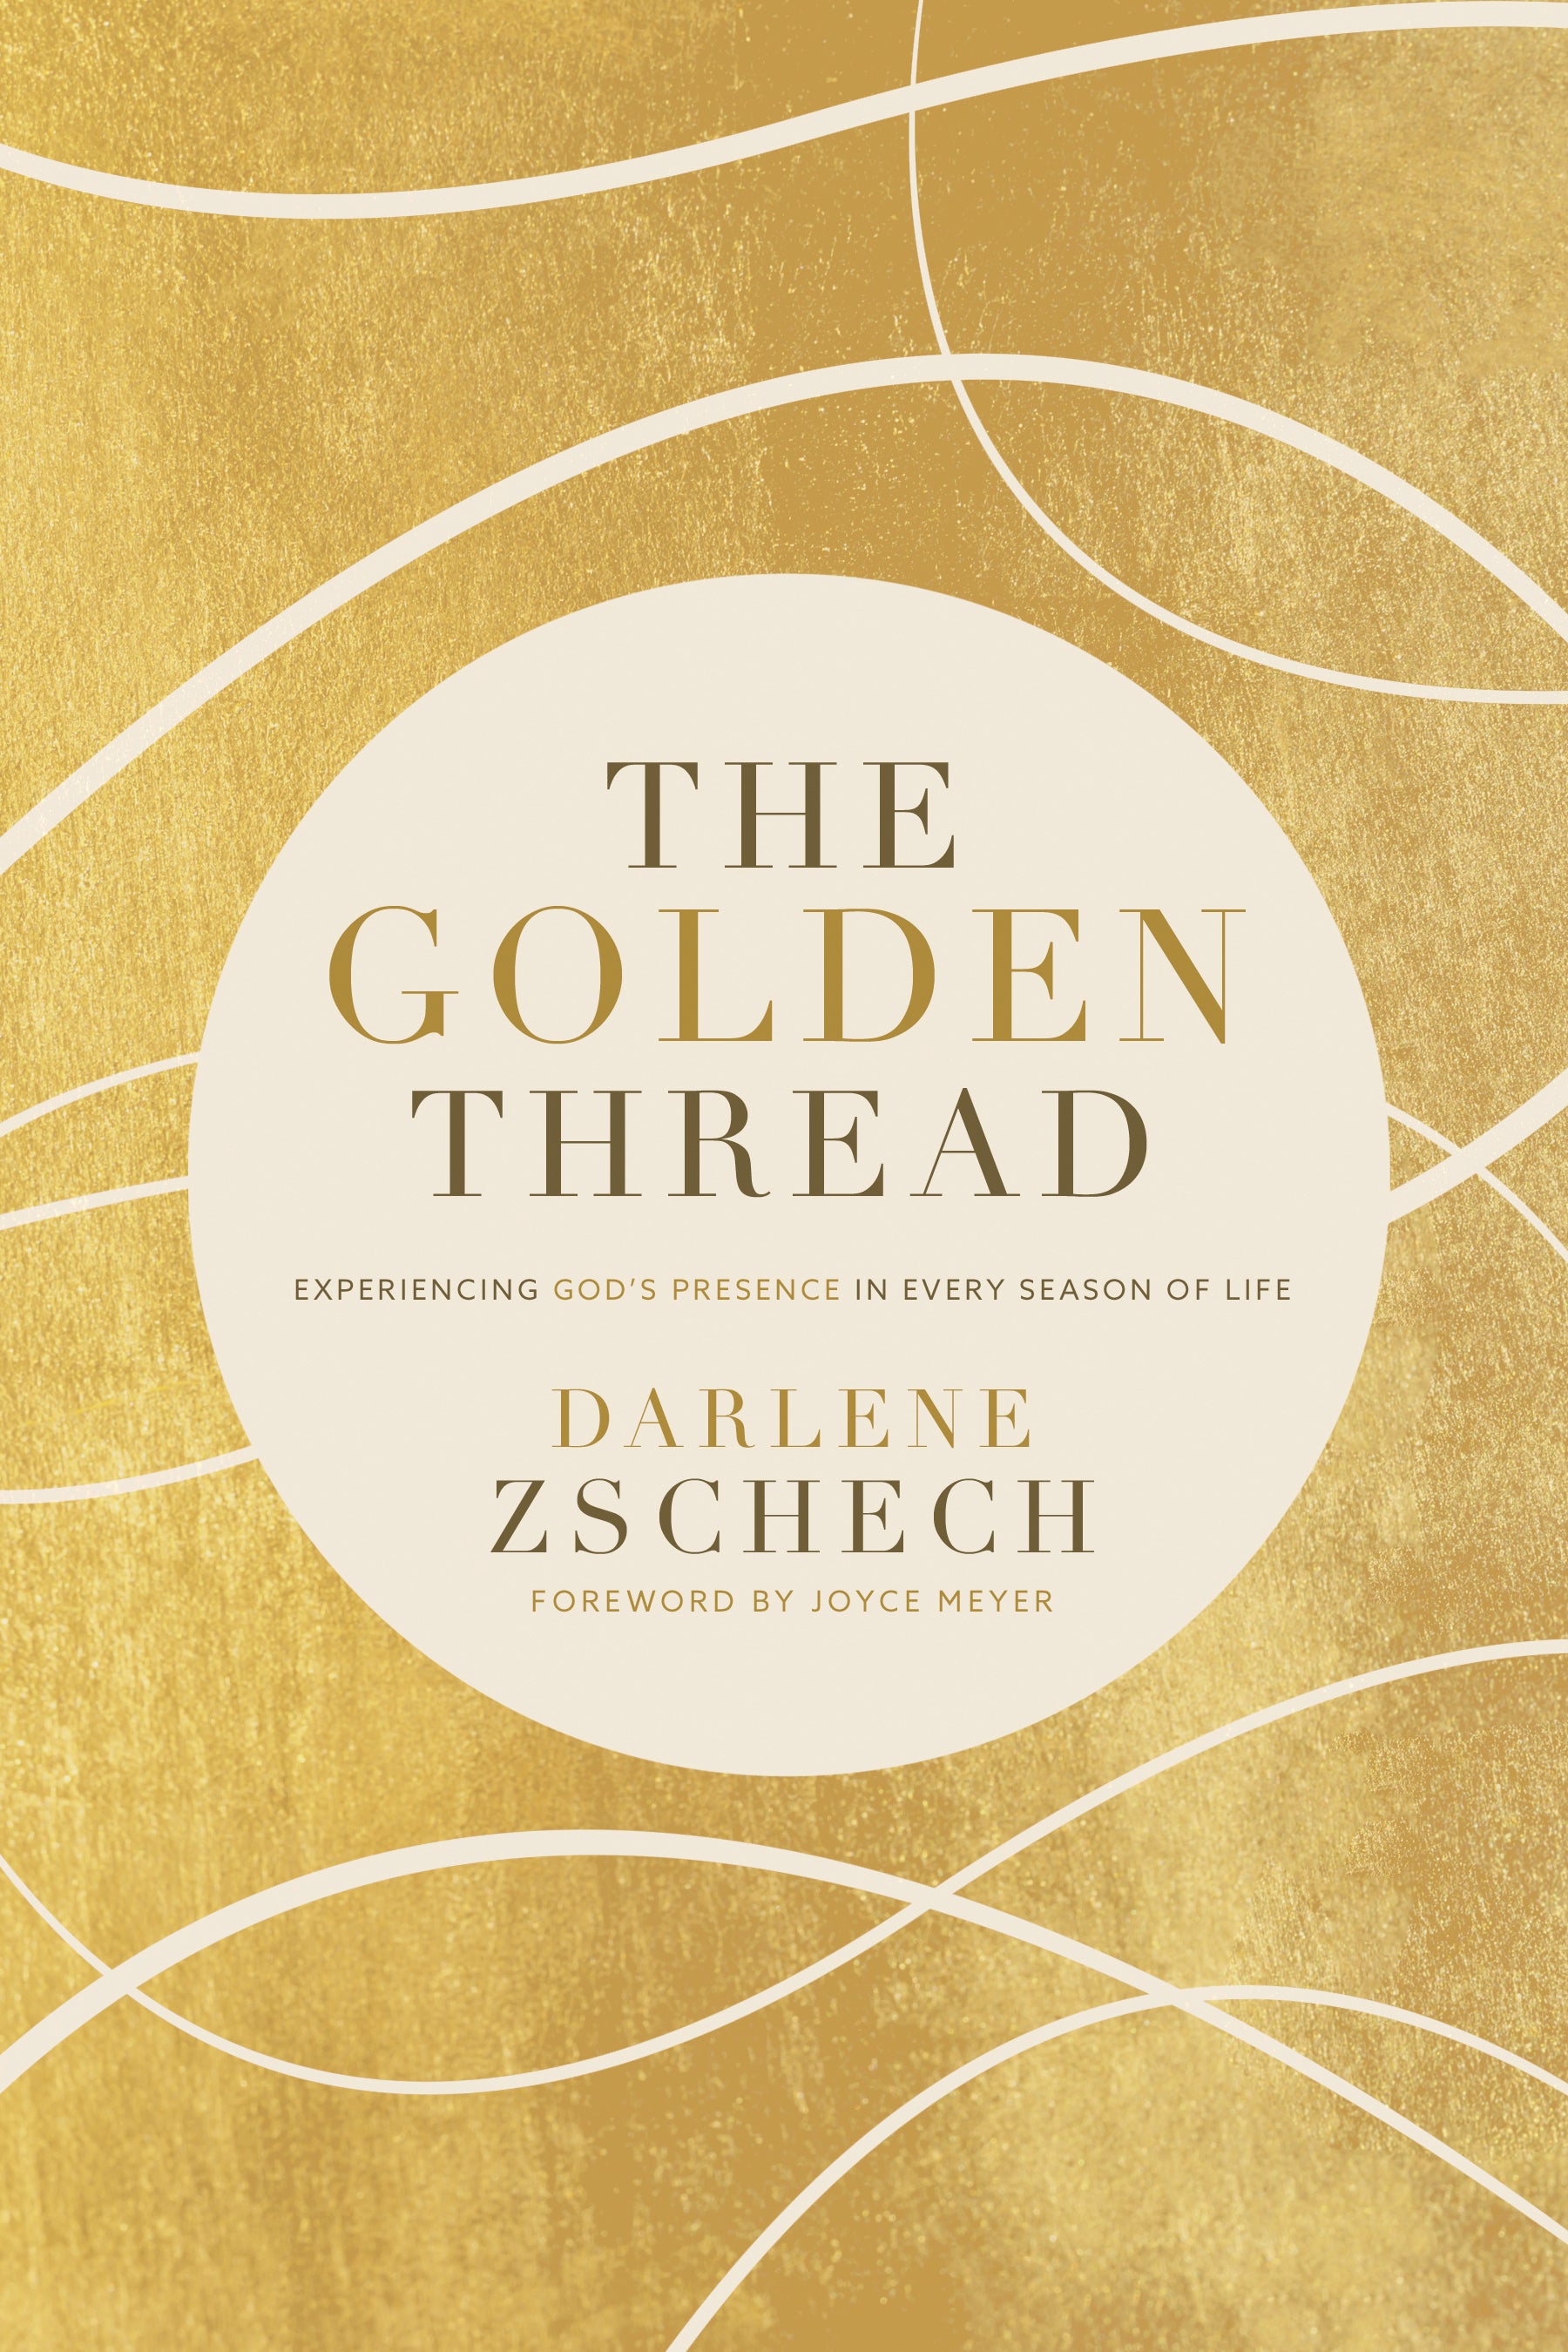 Image of The Golden Thread other